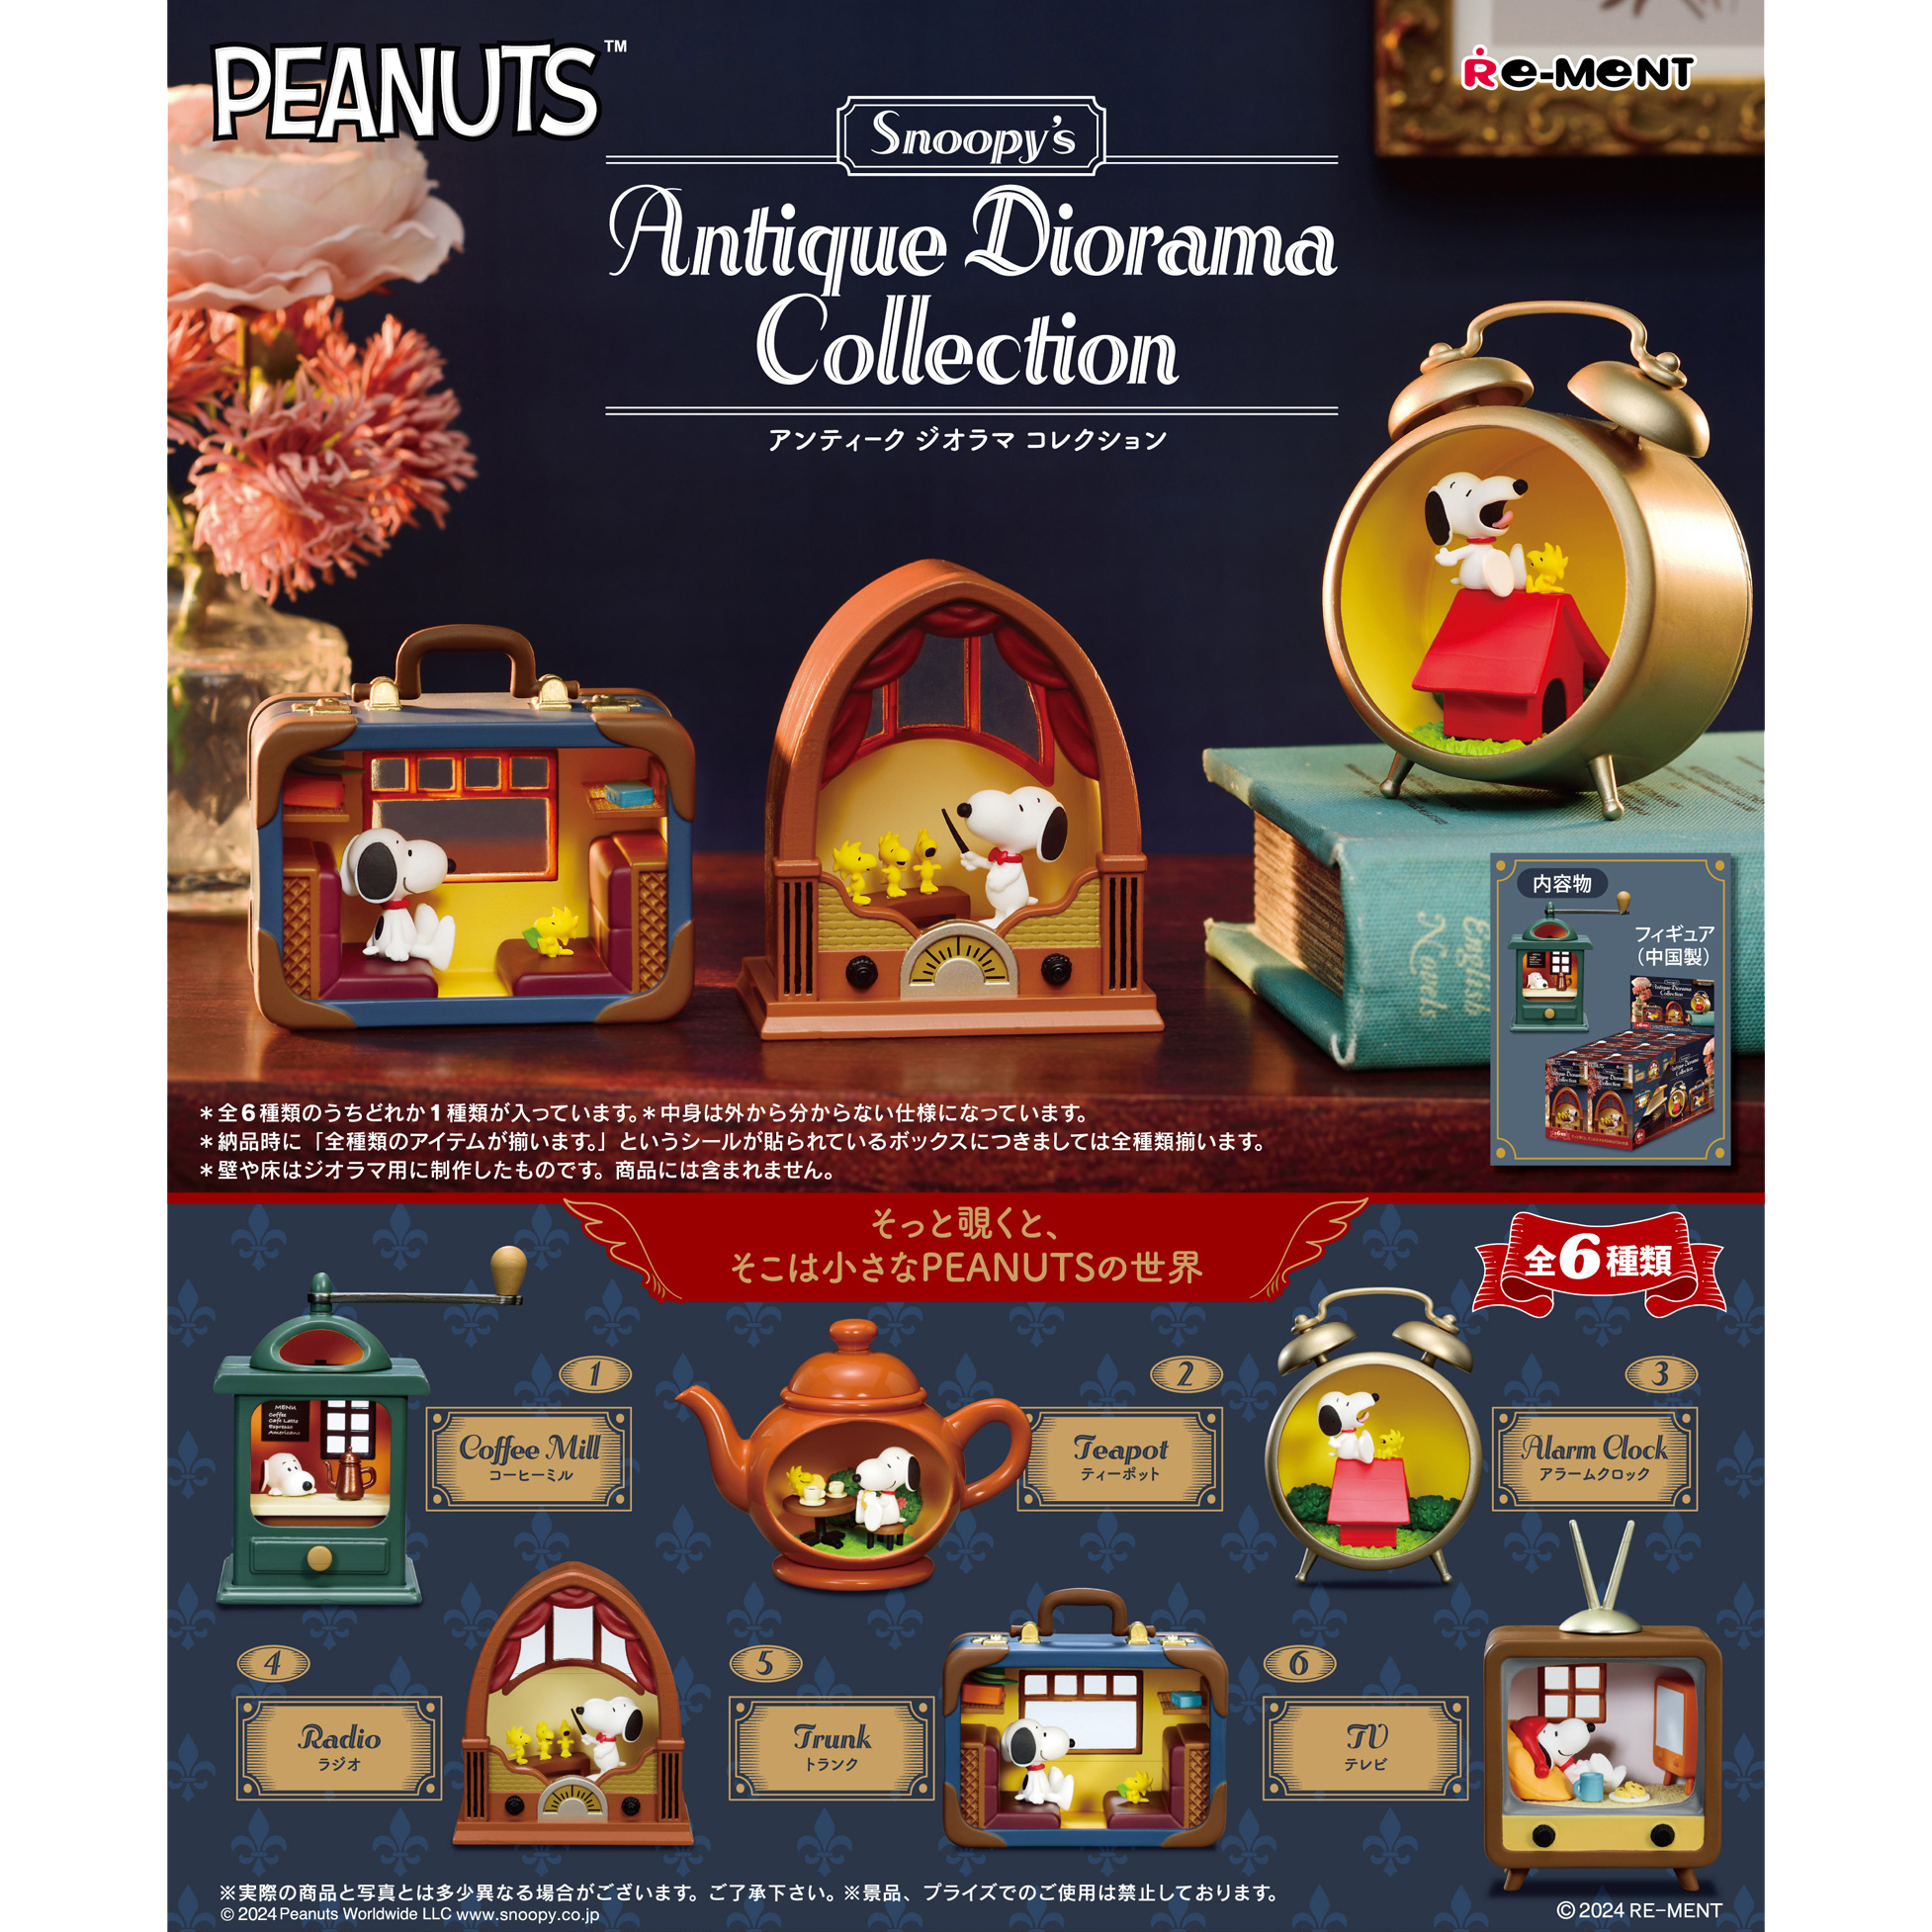 Re-Ment - Peanuts - Snoopy's Antique Diorama Collection (Box of 6) - Marvelous Toys